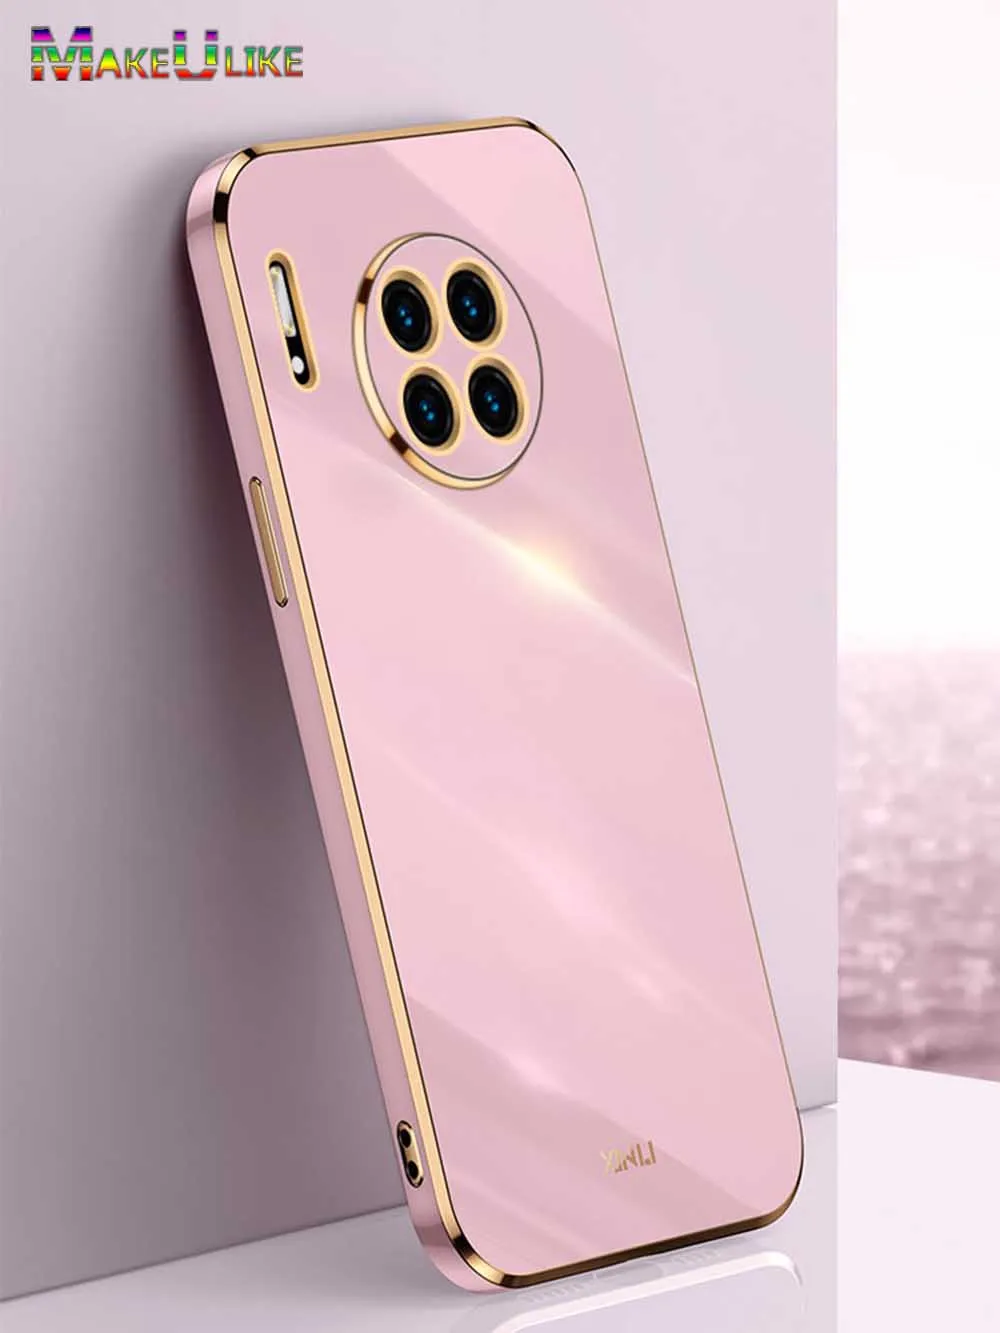 

Soft Case for Huawei Mate 30 Pro Case Plating Frame Silicone Slim Shockproof Cover for Mate 10 20 30 40 50 Pro Mate30 30Pro Case